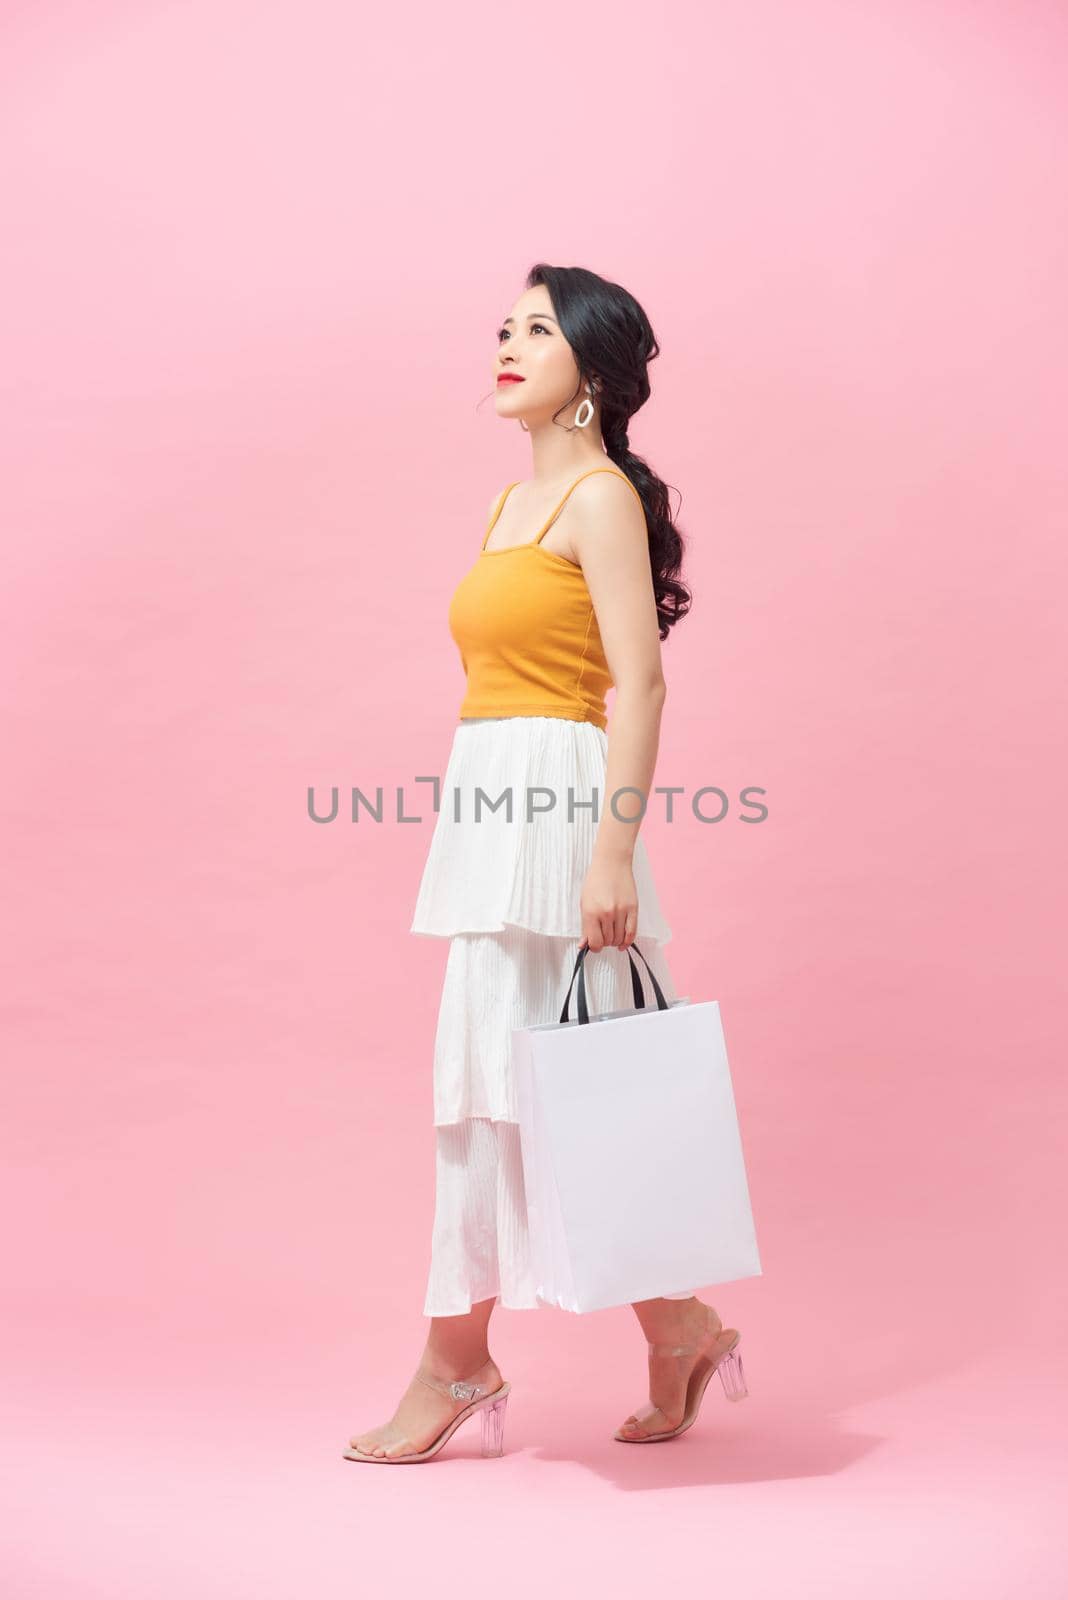 Charming young Asian woman happily shopping during sale season isolated on pink background. by makidotvn